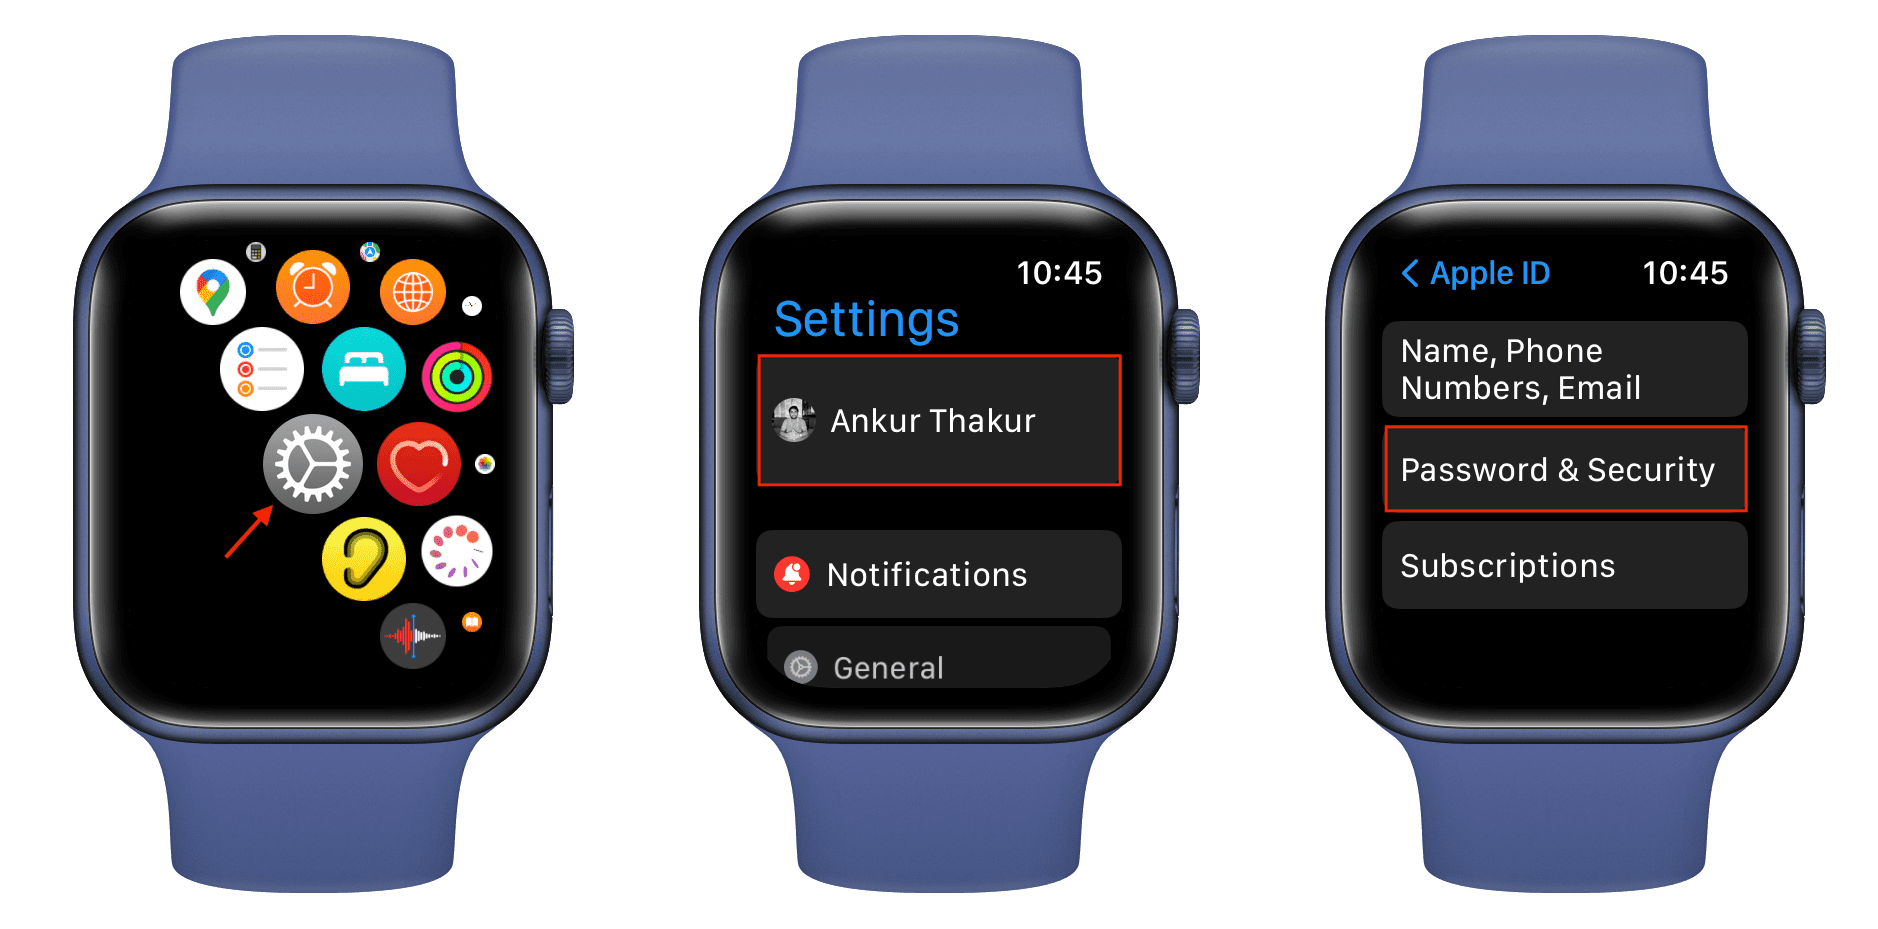 Password and Security in Apple Watch settings